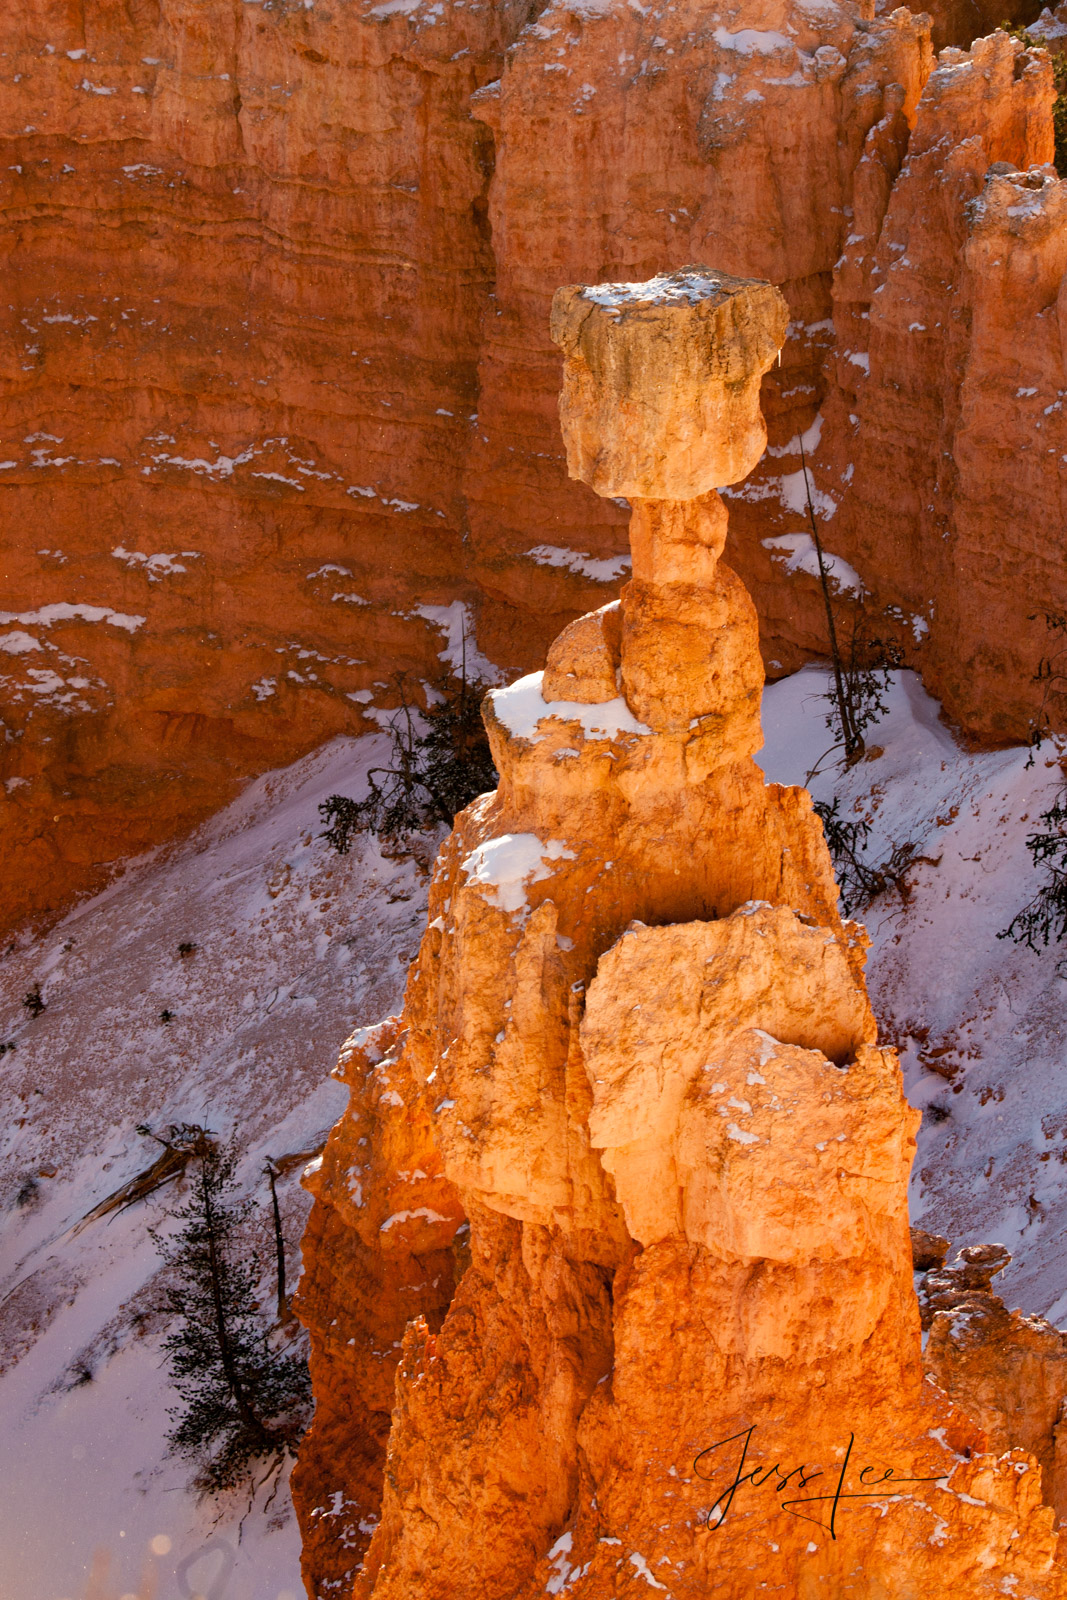 Limited Edition of 50 Exclusive high-resolution Museum Quality Fine Art Prints of Thors Hammer, Bryce Canyon. Photos Copyright...